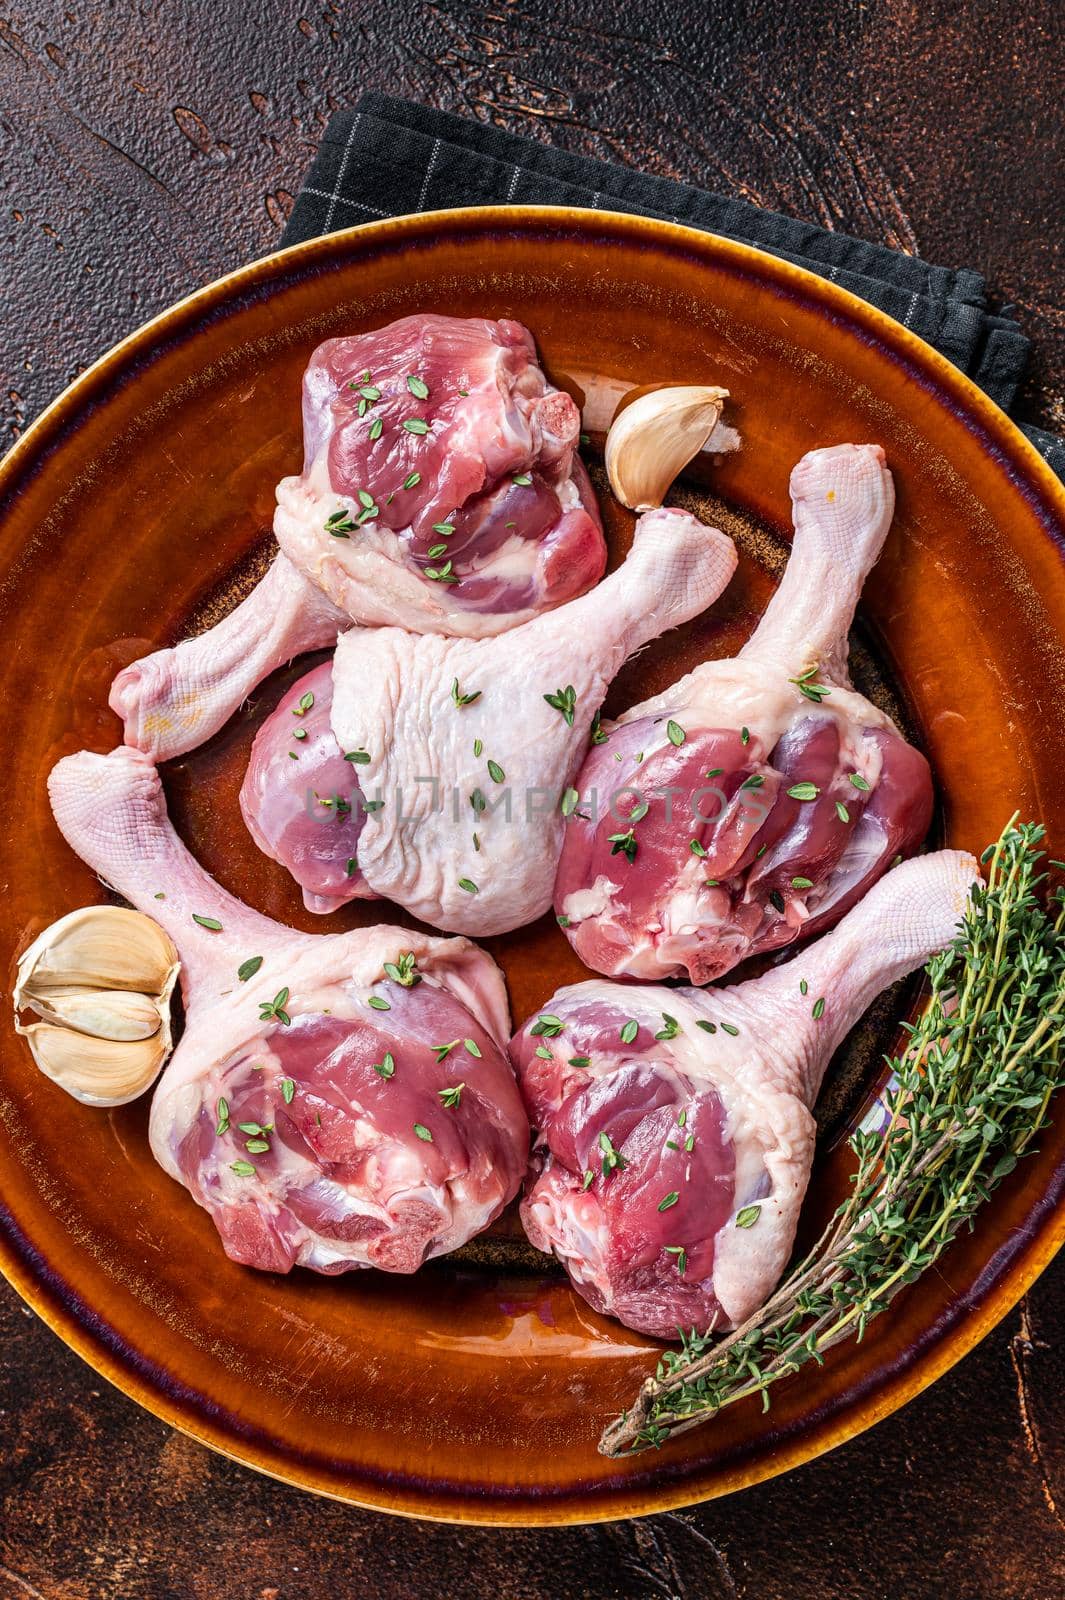 Raw Poultry meat - Duck legs drumsticks on a rustic plate with herbs. Dark background. Top view by Composter